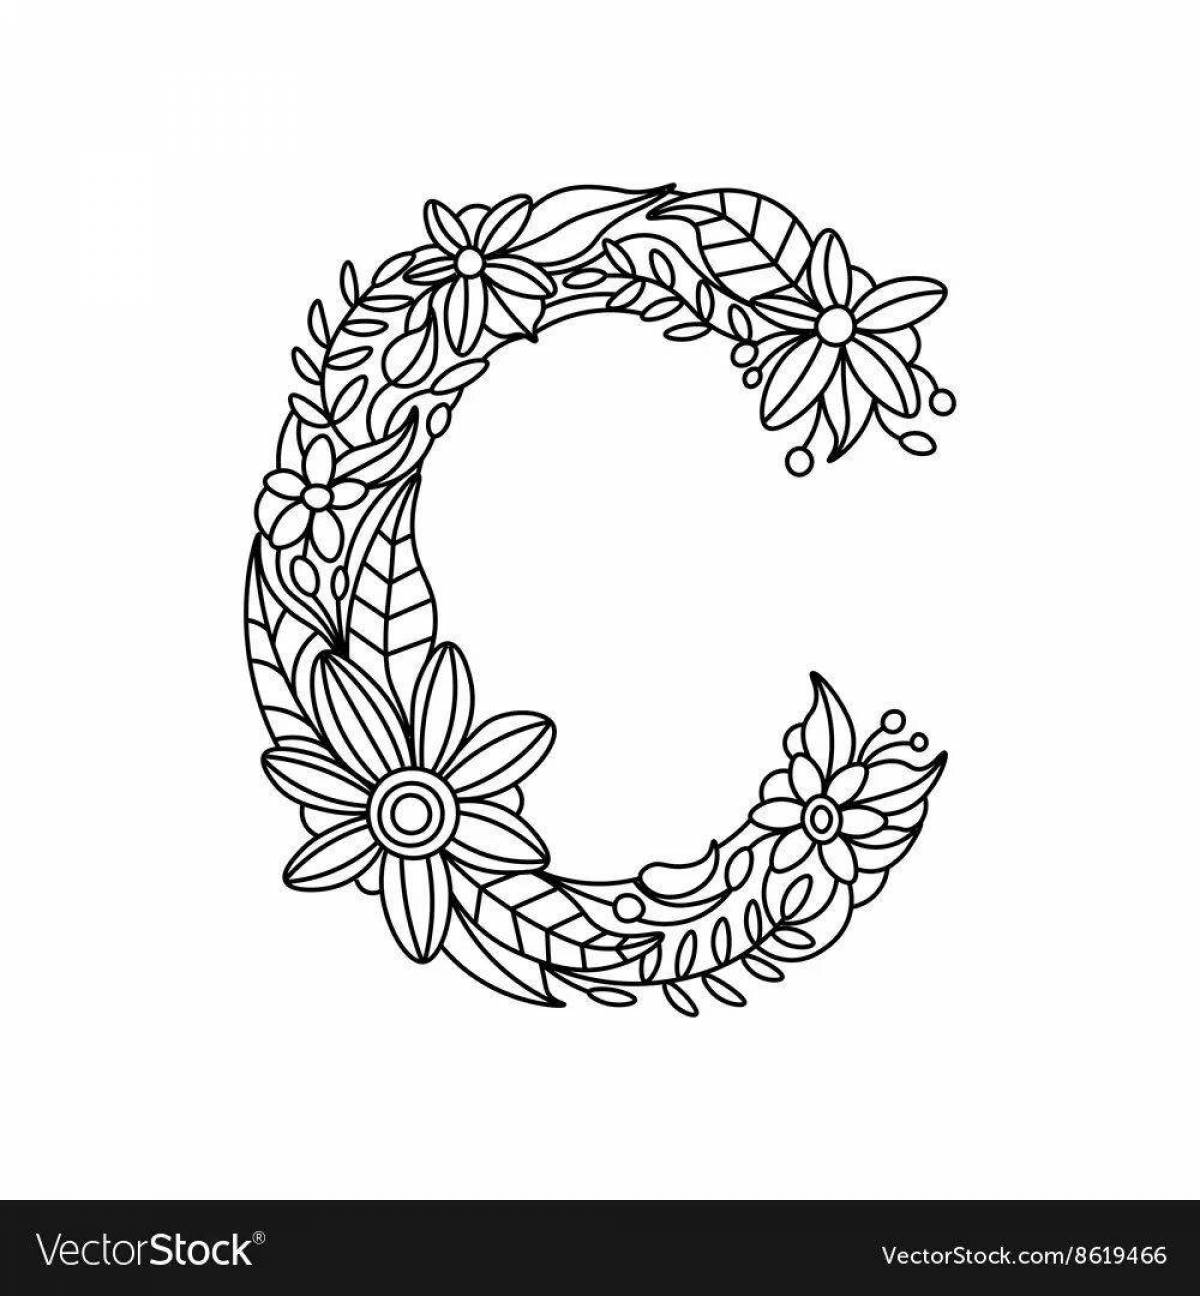 Fun letter c with flowers